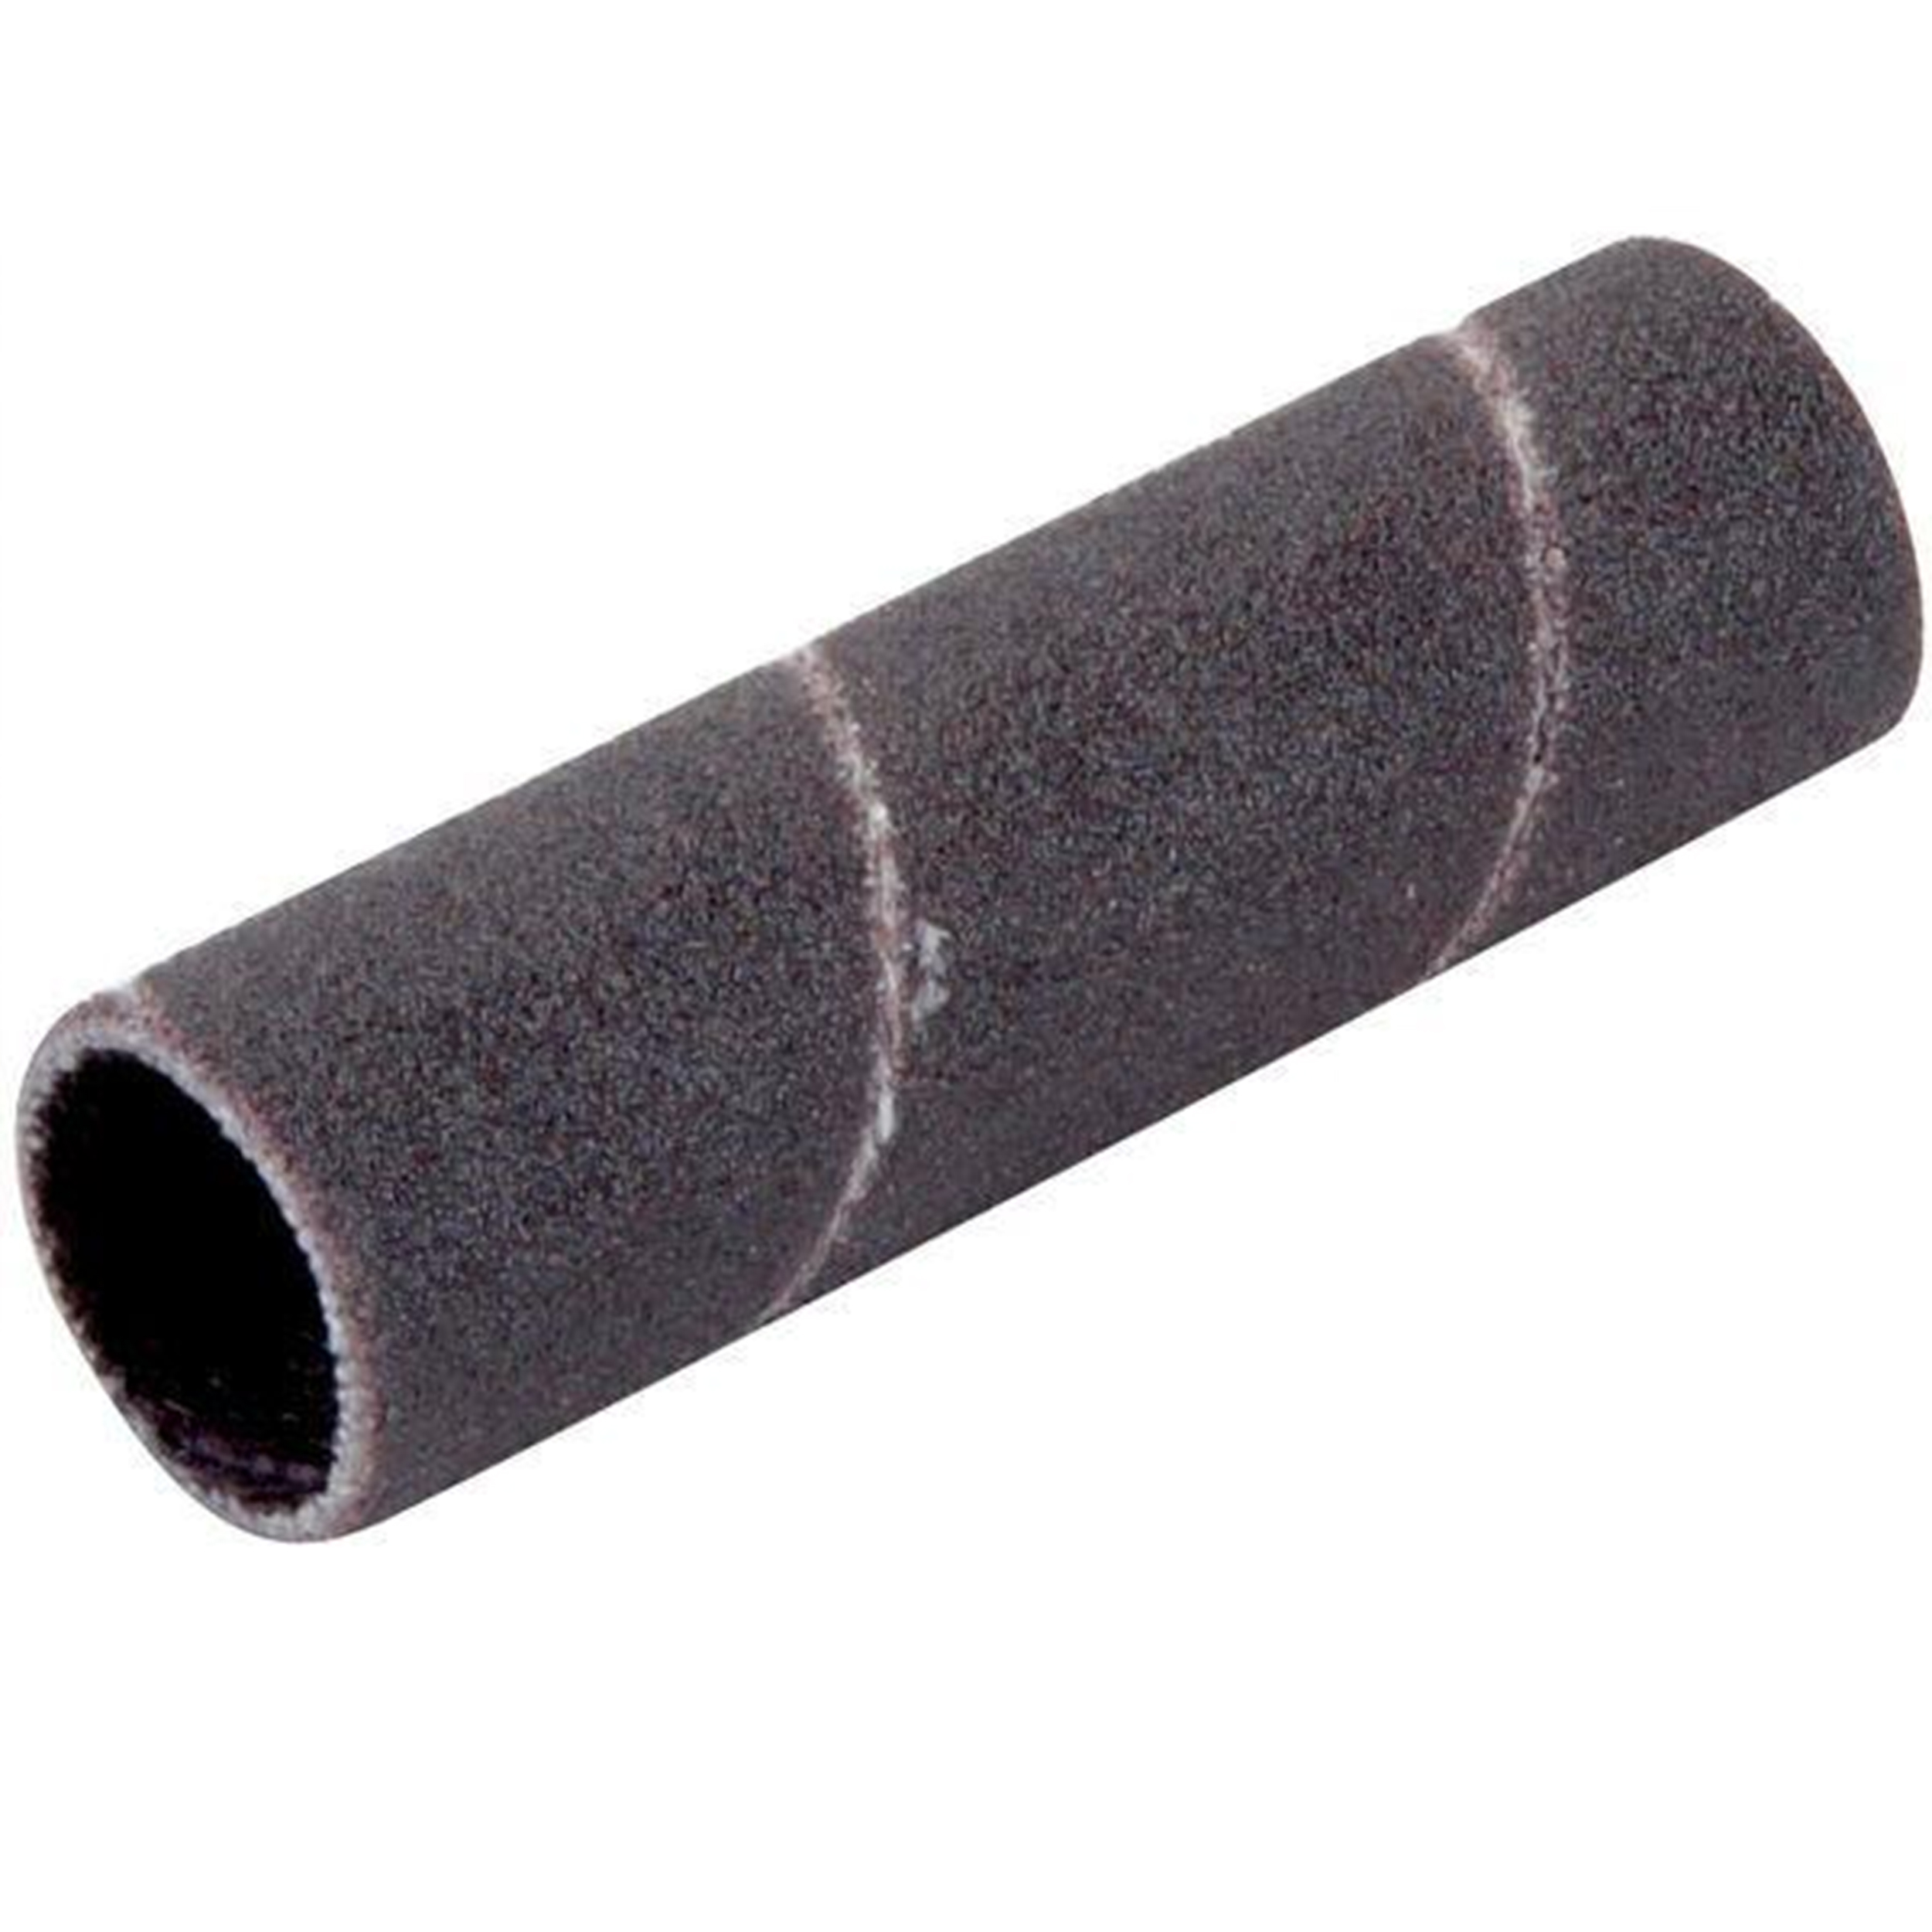 Sanding Drum Replacement Sleeve, 1/2" Dia. X 2" Length, 80 Grit, 12 Pack